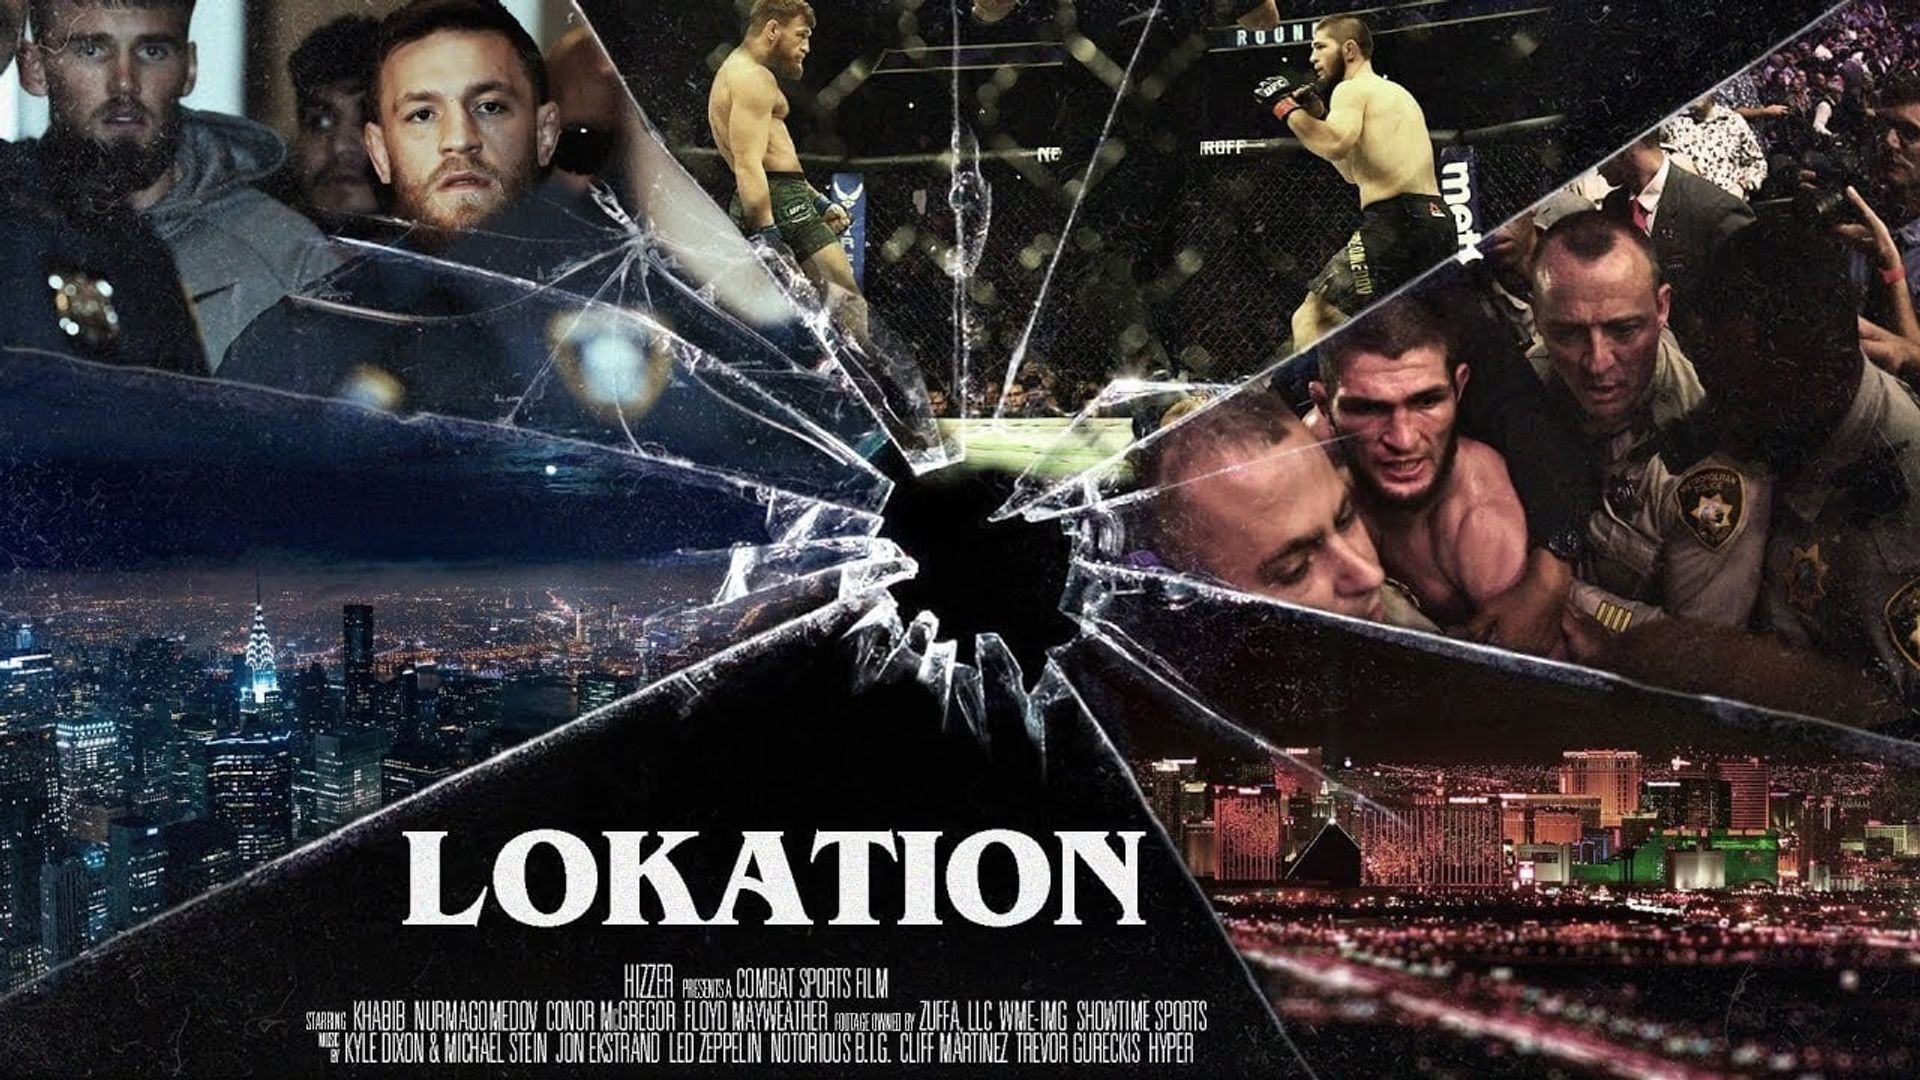 Lokation - A Combat Sports Film by Hizzer background